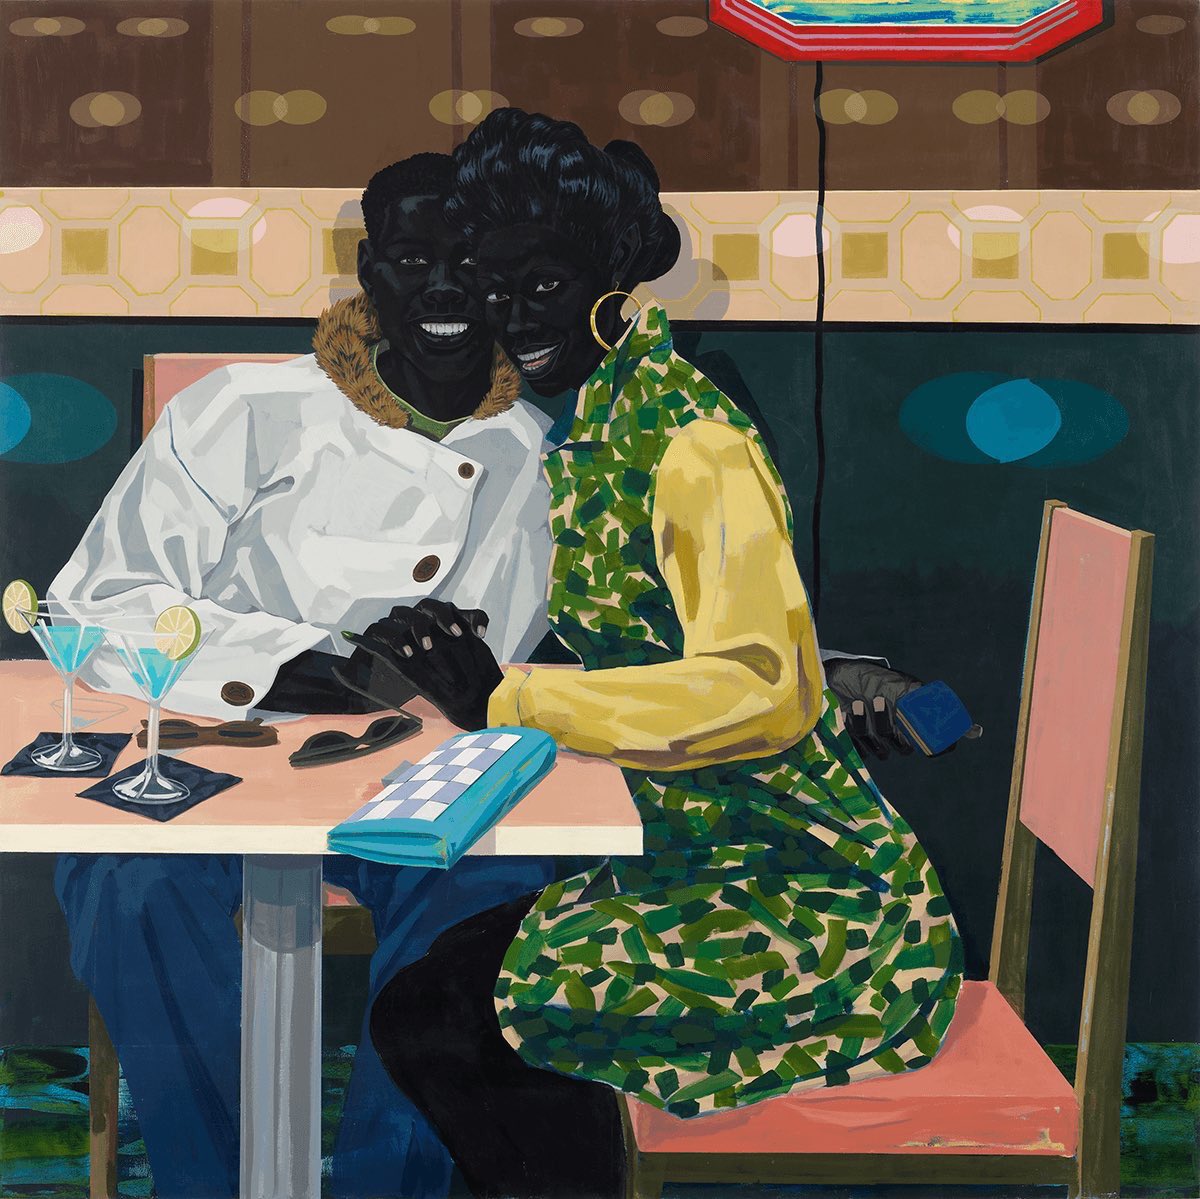 1st up is Kerry James Marshall. His work captures the black experience in such a beautiful, slightly abstract, way.  @seanbeauford did a wonderful thread mashing up Jay-Z lyrics with KJM’s artwork that really embodies the spirit his work. Enjoy it here:  https://twitter.com/seanbeauford/status/1127321072049840128?s=21